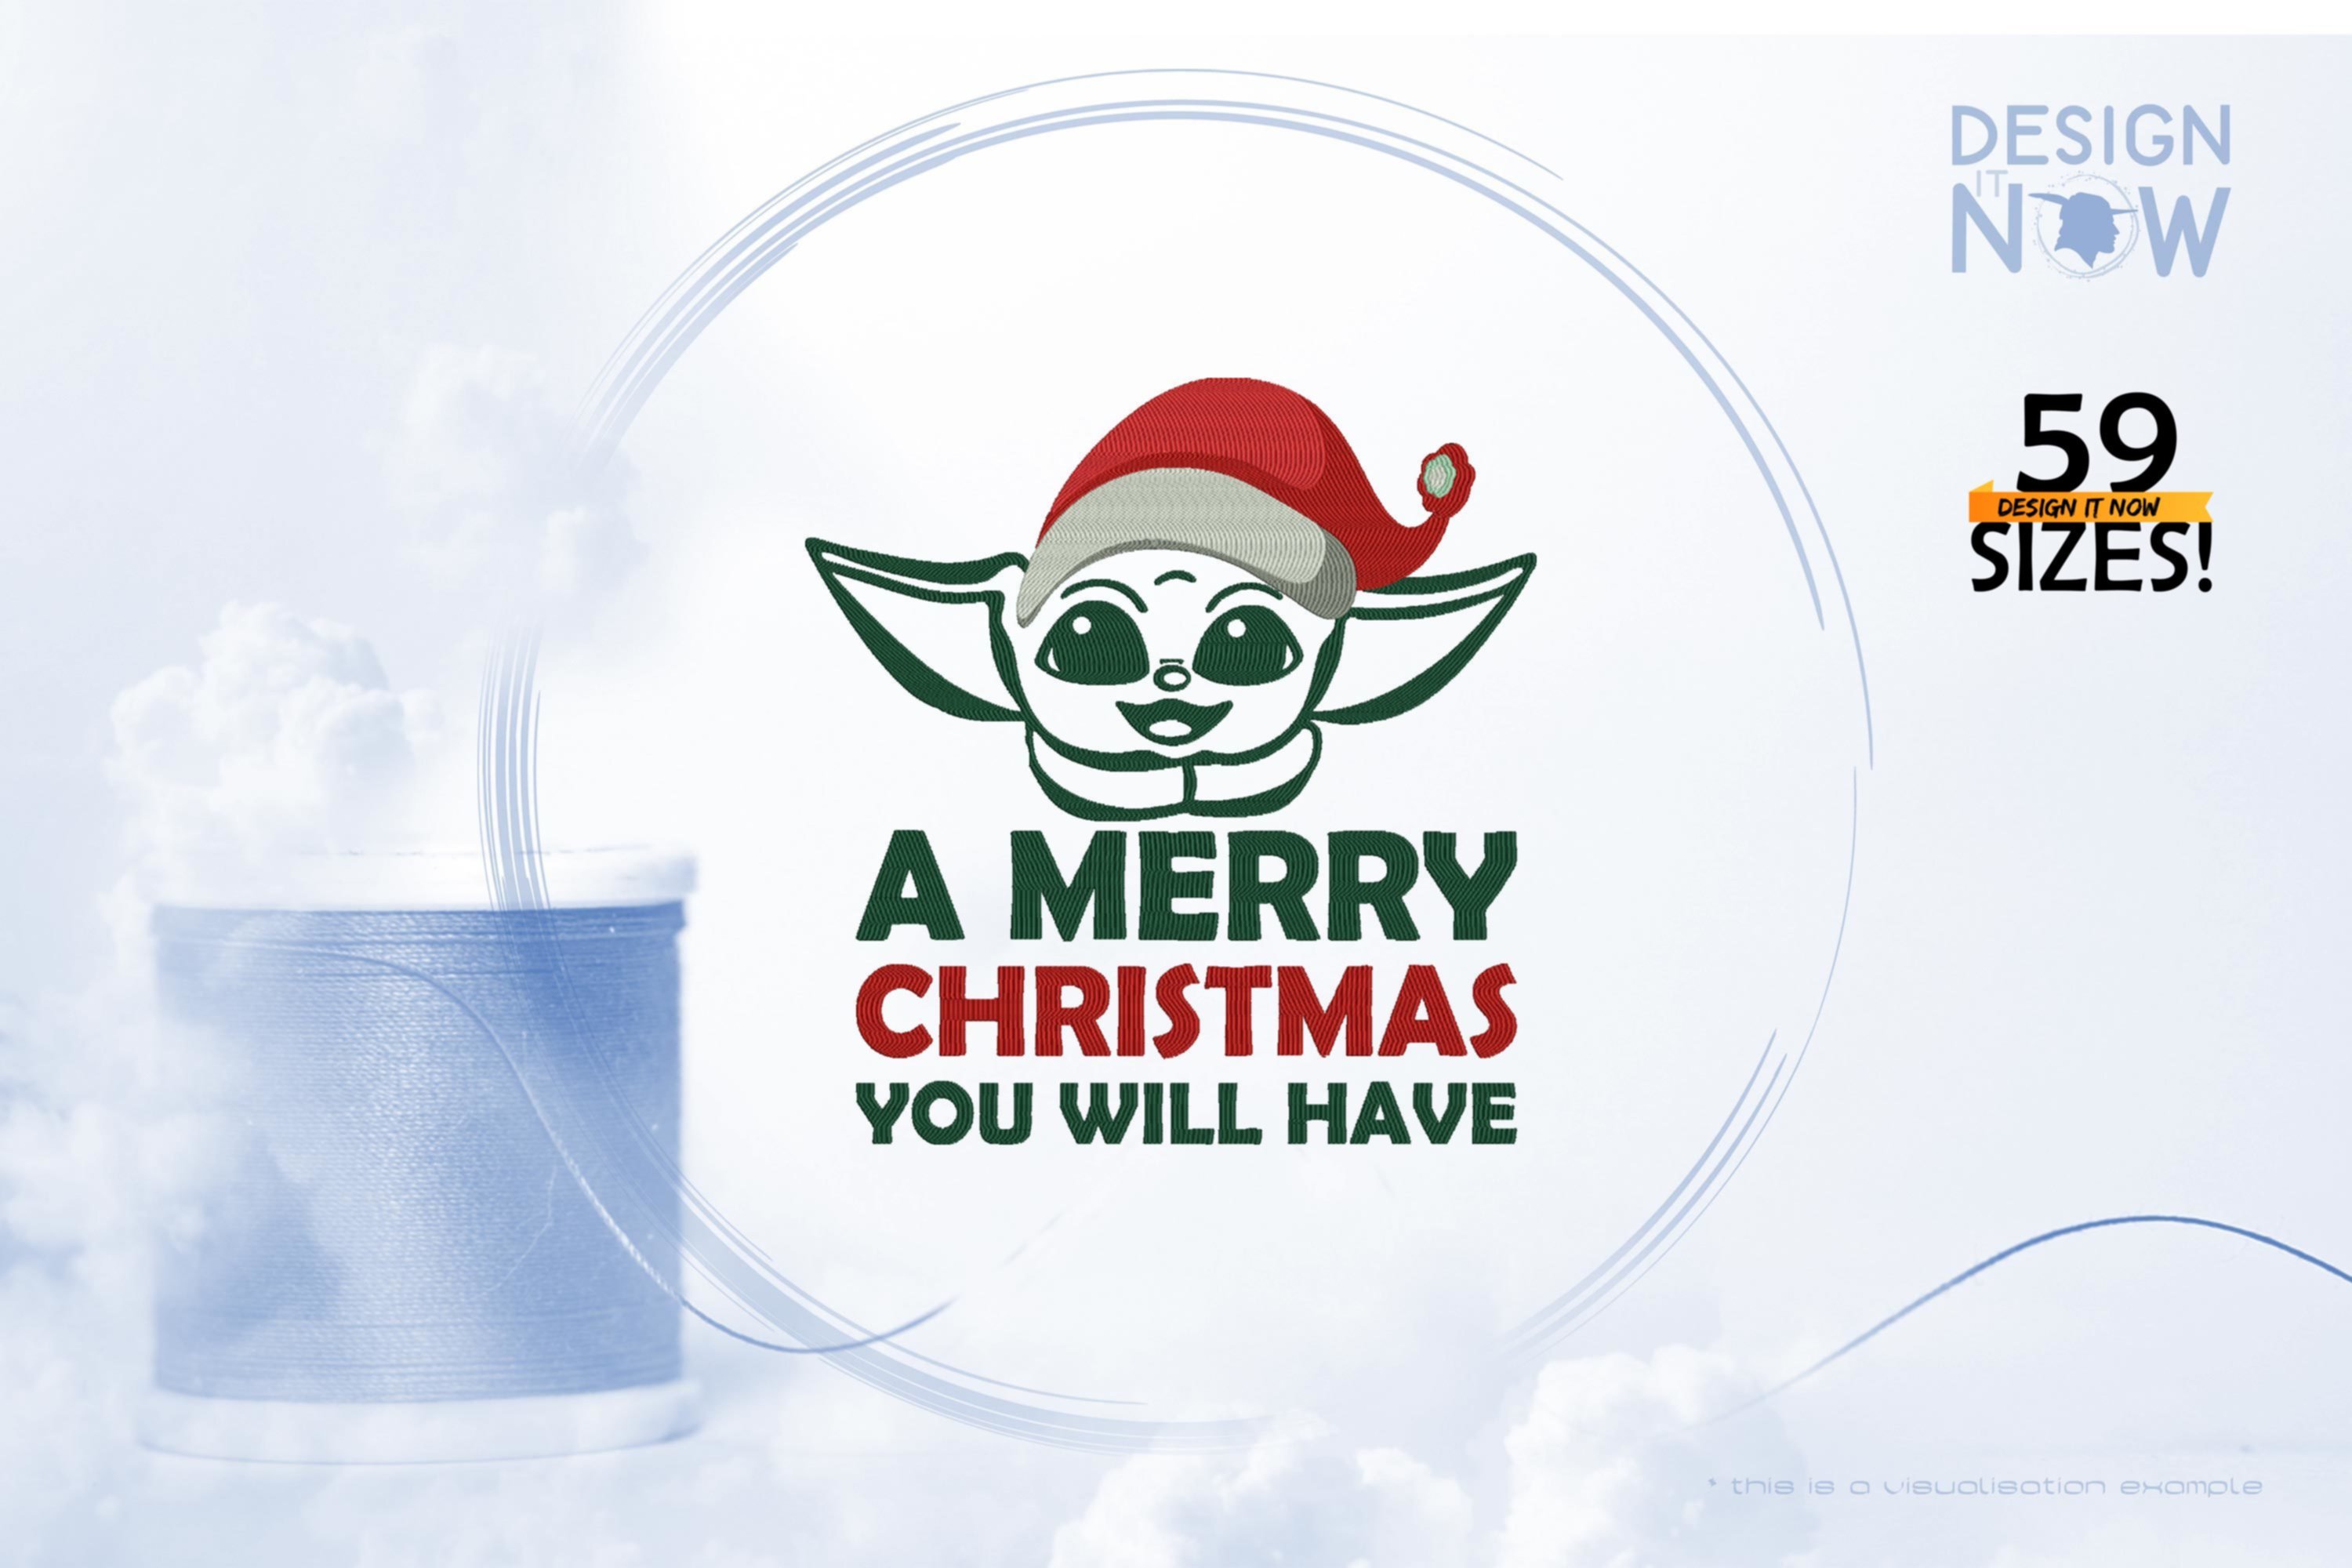 Tribute To Fictional Character Grogu aka Baby Yoda (A Merry Christmas You Will Have)